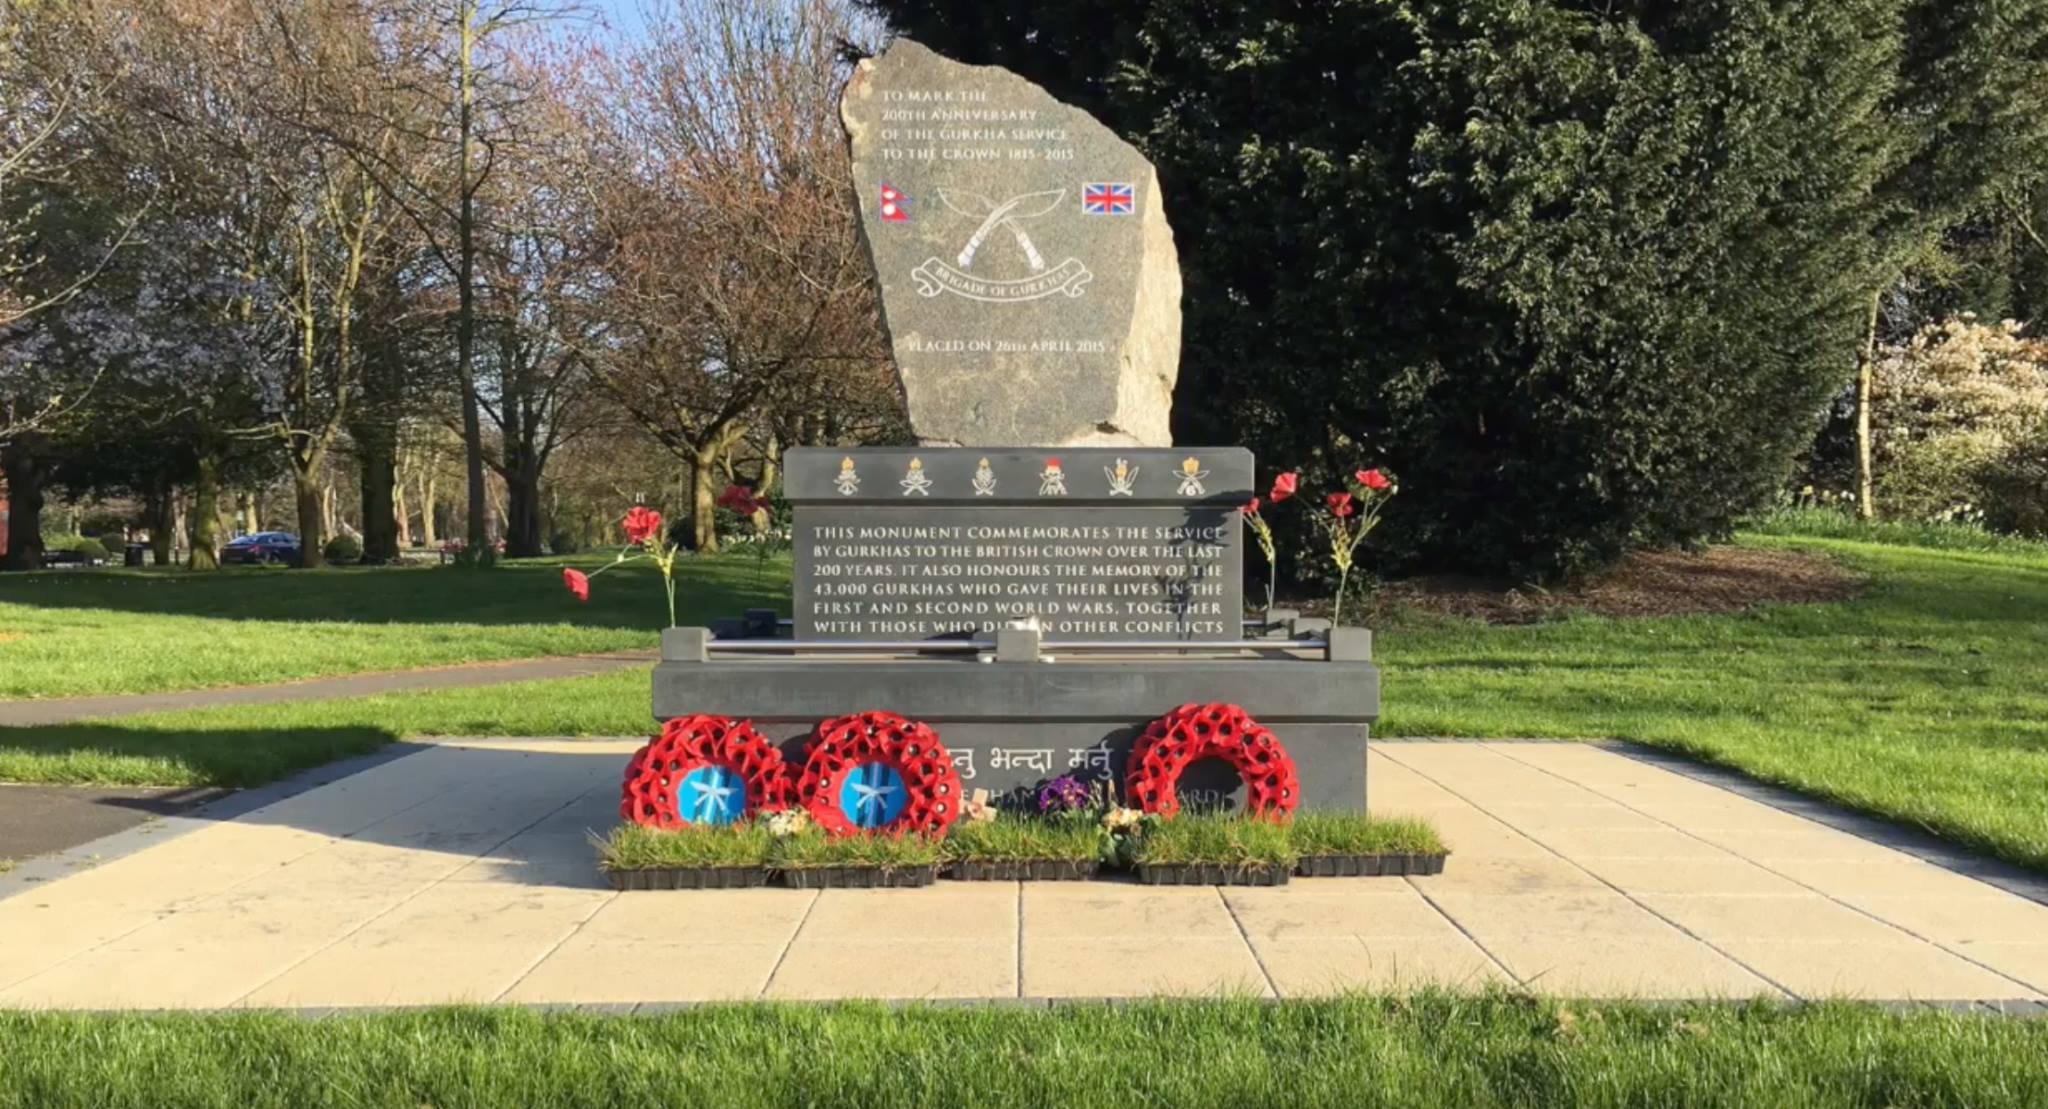 Gurkha memorial on paved area in Riversley Park